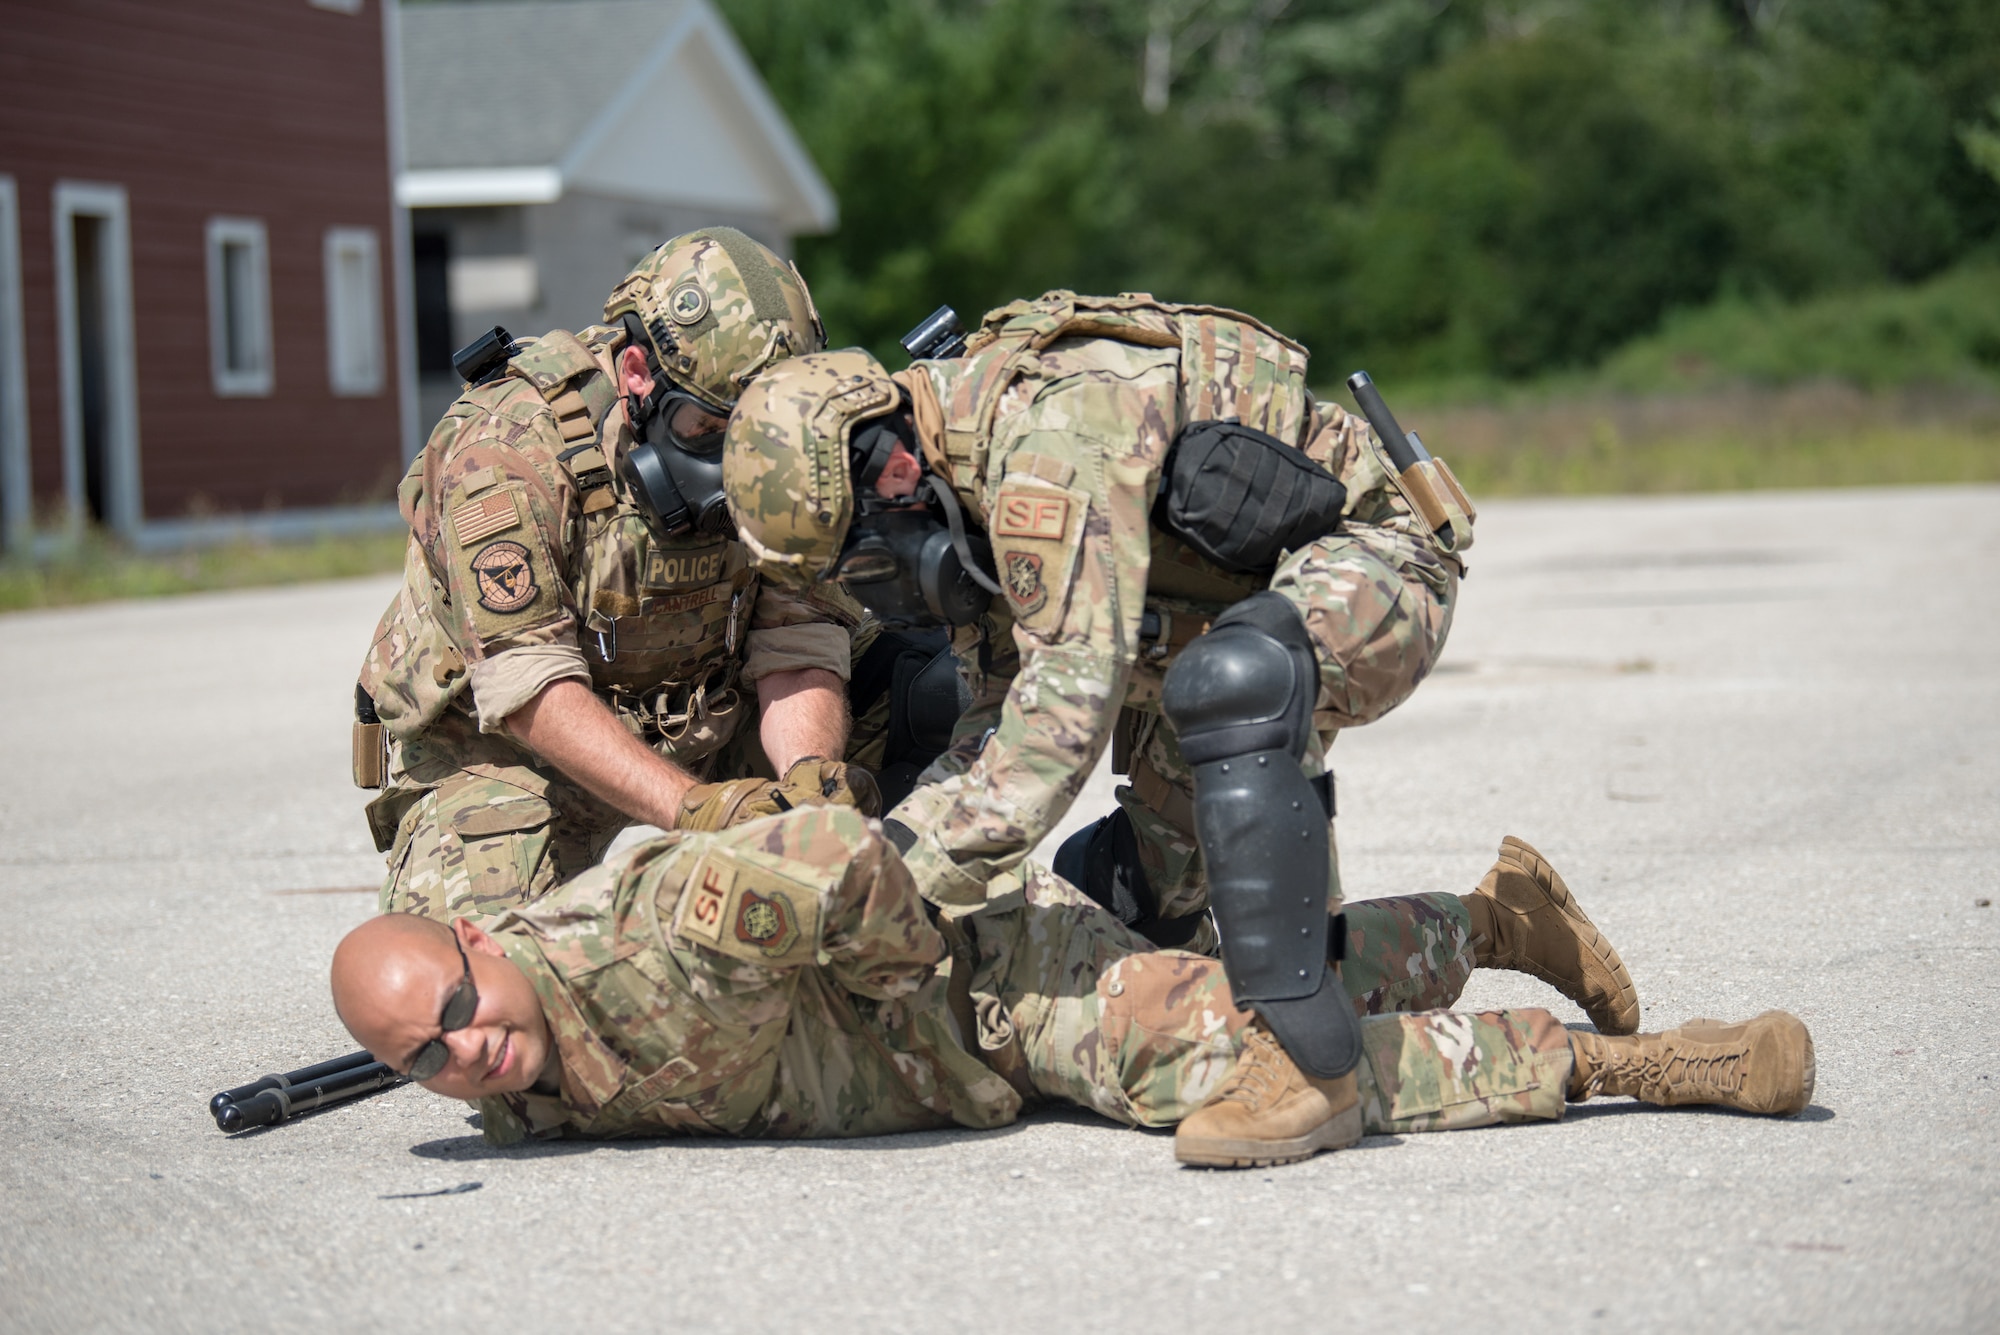 Members of the Kentucky Air National Guard’s 123rd Security Forces Squadron restrain an Airman during a simulated riot in Alpena, Mich., Aug 19, 2020. The Airmen spent a week at Alpena Combat Readiness Training Center to prepare them for domestic operations and law enforcement assistance. (U.S. Air National Guard photo by Phil Speck)